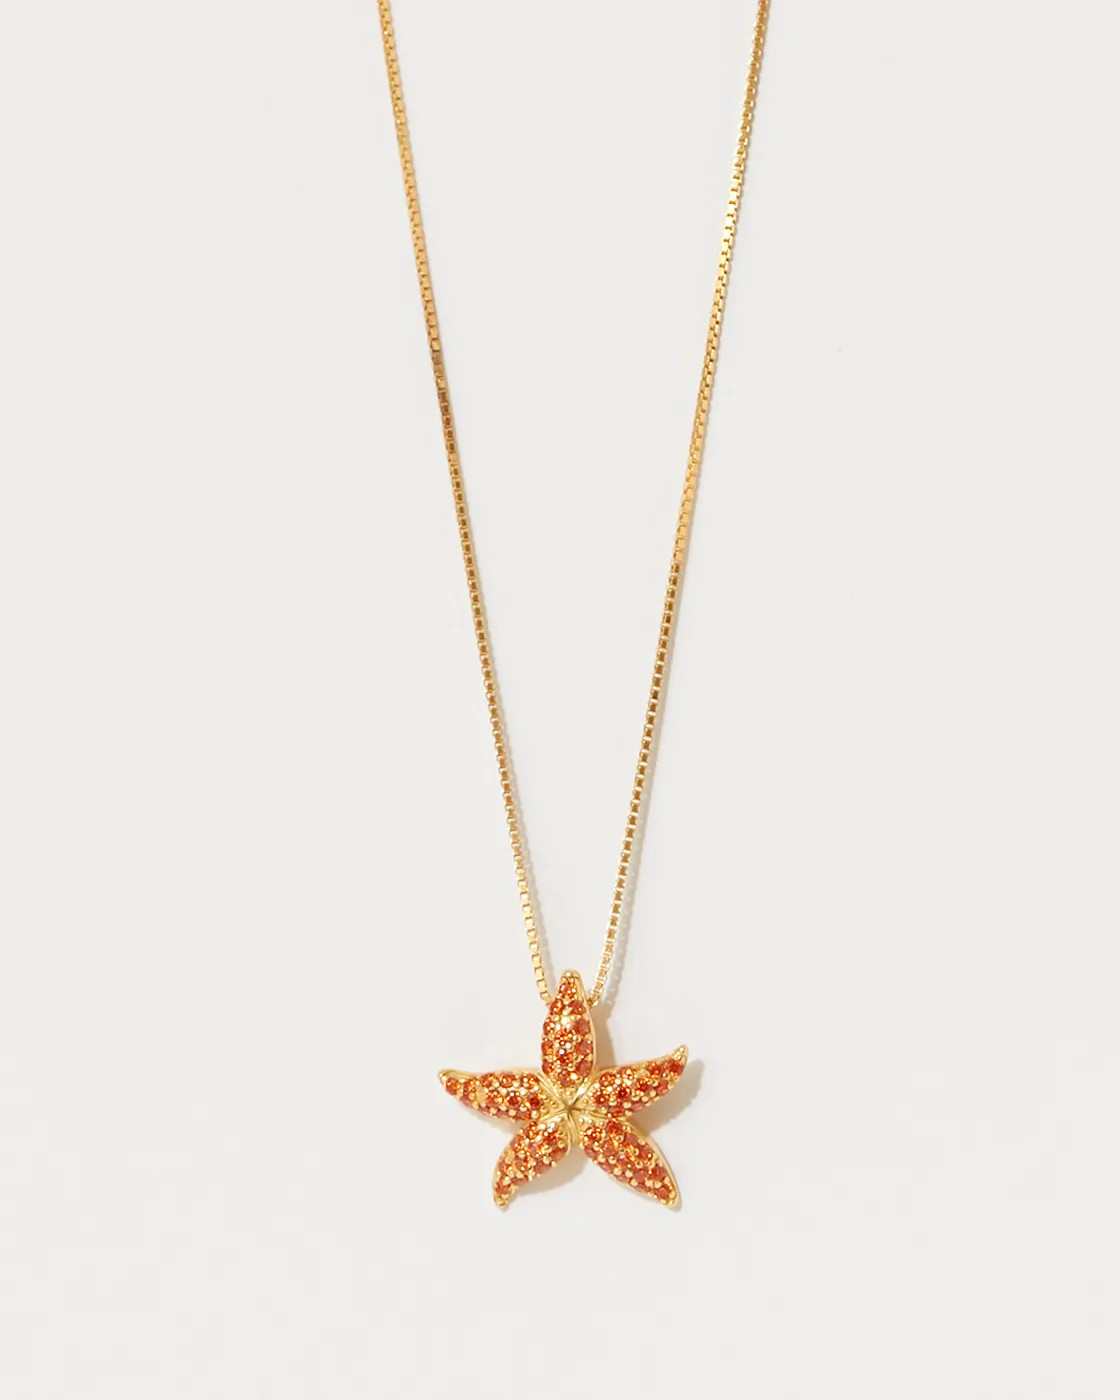 Krill Sterling Silver Necklace with Starfish Pendant